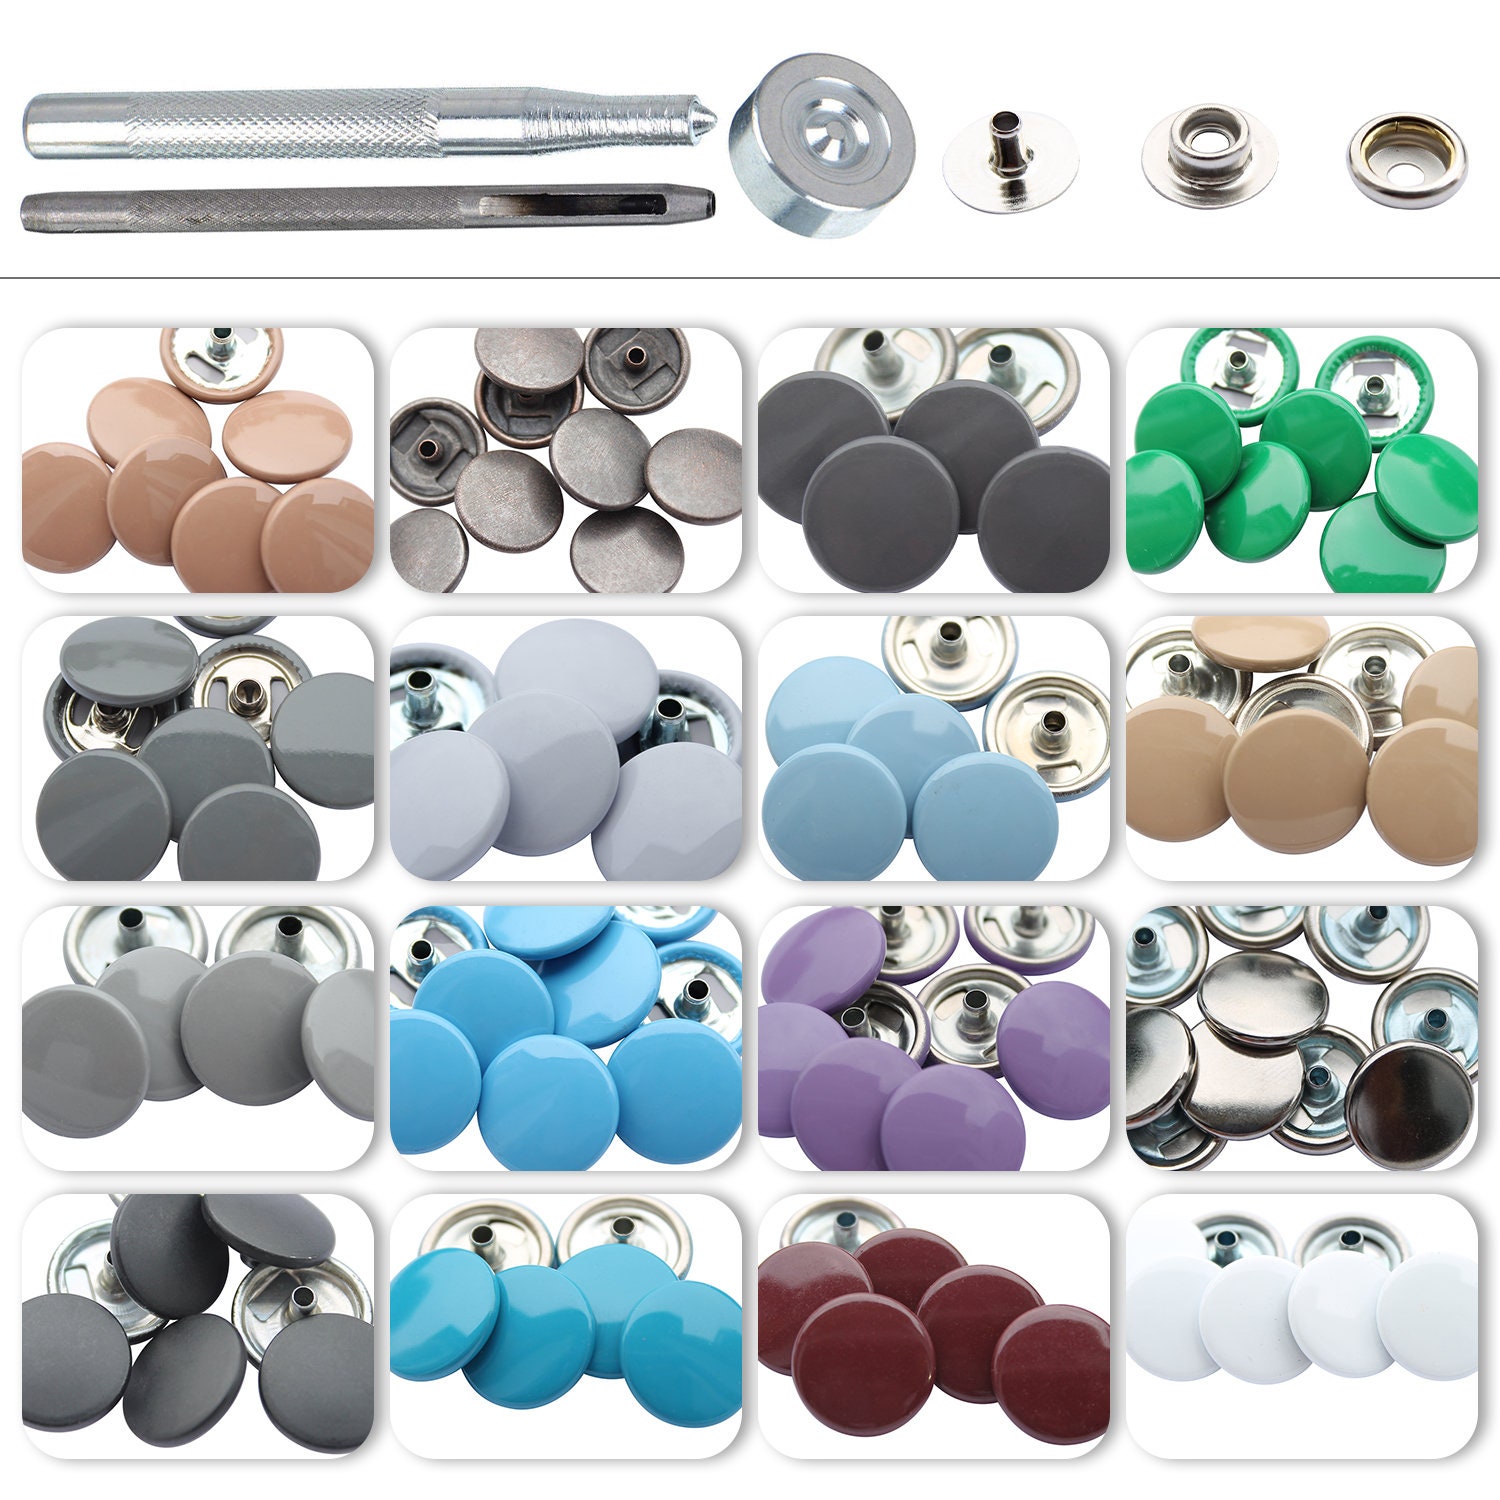 50 Sets Canvas Snap Kit 15mm Metal Snaps Button with 2 Tool, Silver Tone -  Silver Tone - Bed Bath & Beyond - 37559210